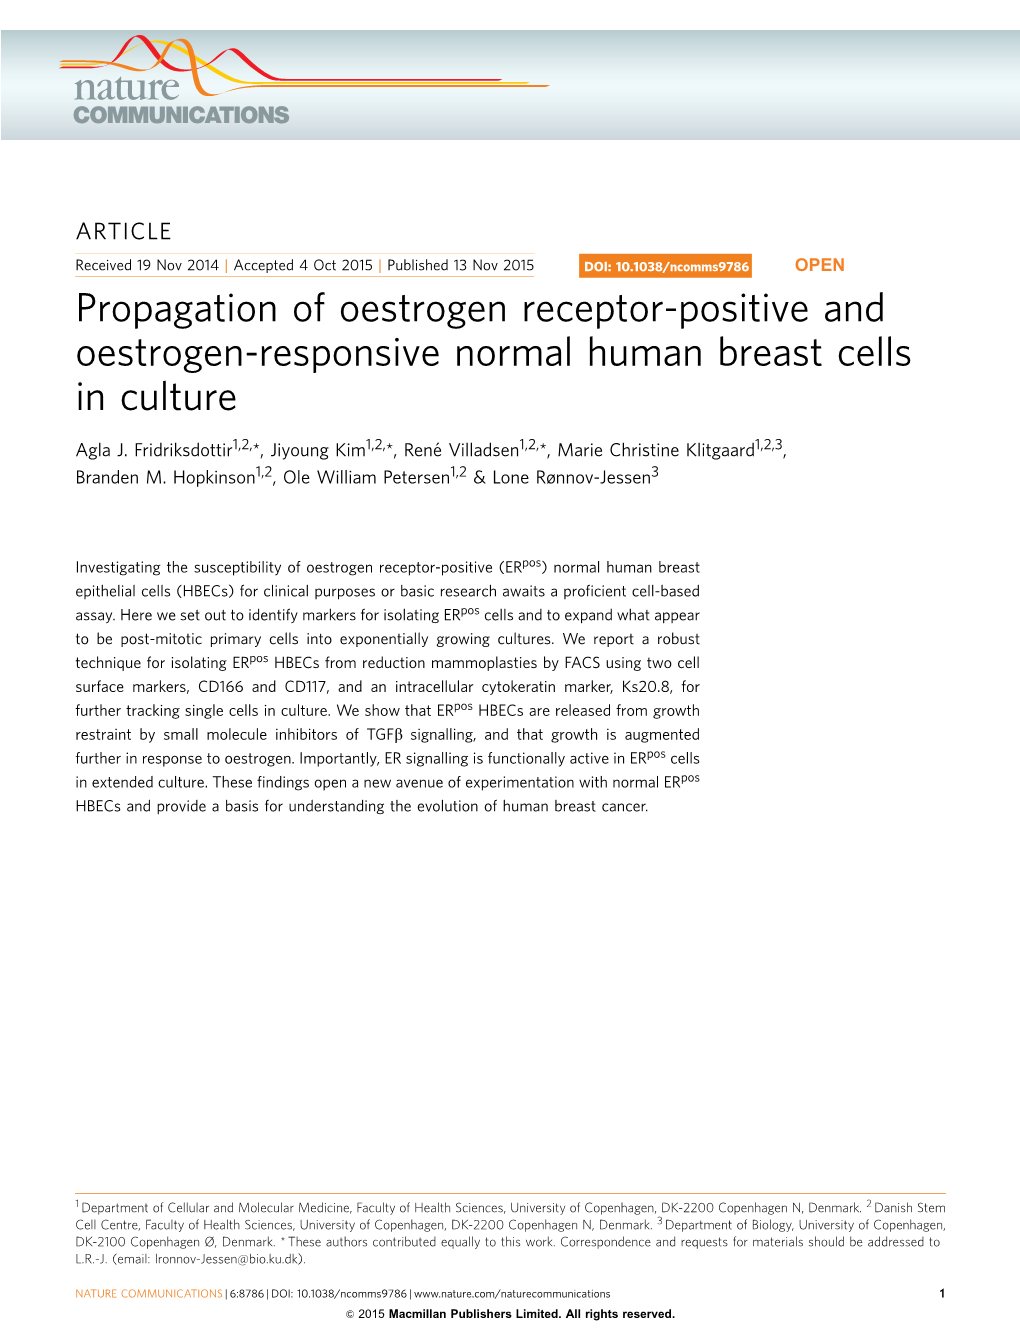 Propagation of Oestrogen Receptor-Positive and Oestrogen-Responsive Normal Human Breast Cells in Culture